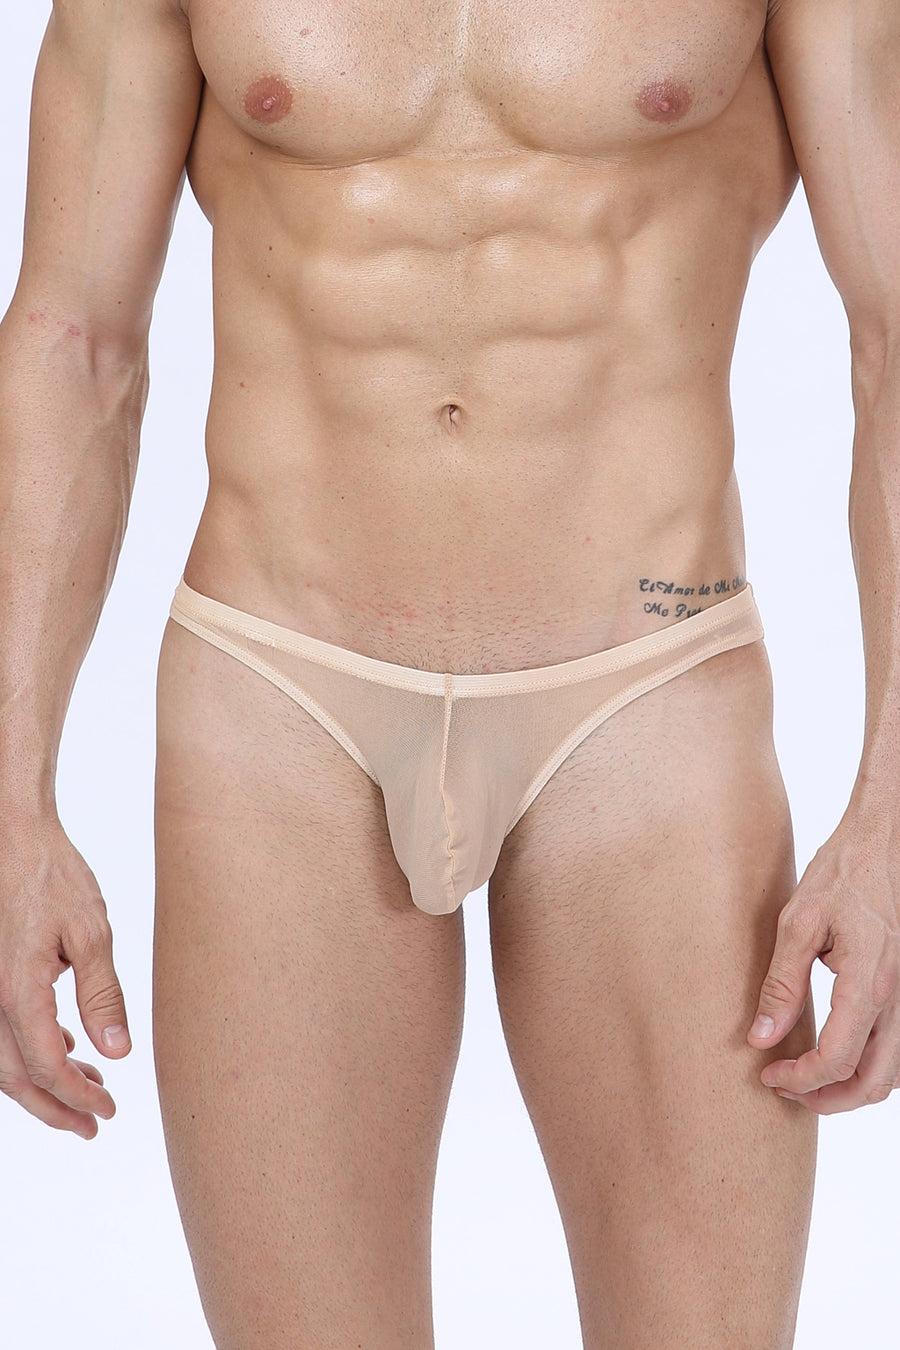 Manview Mens Sheer Net G Thong Lowrise Pouch Underwear